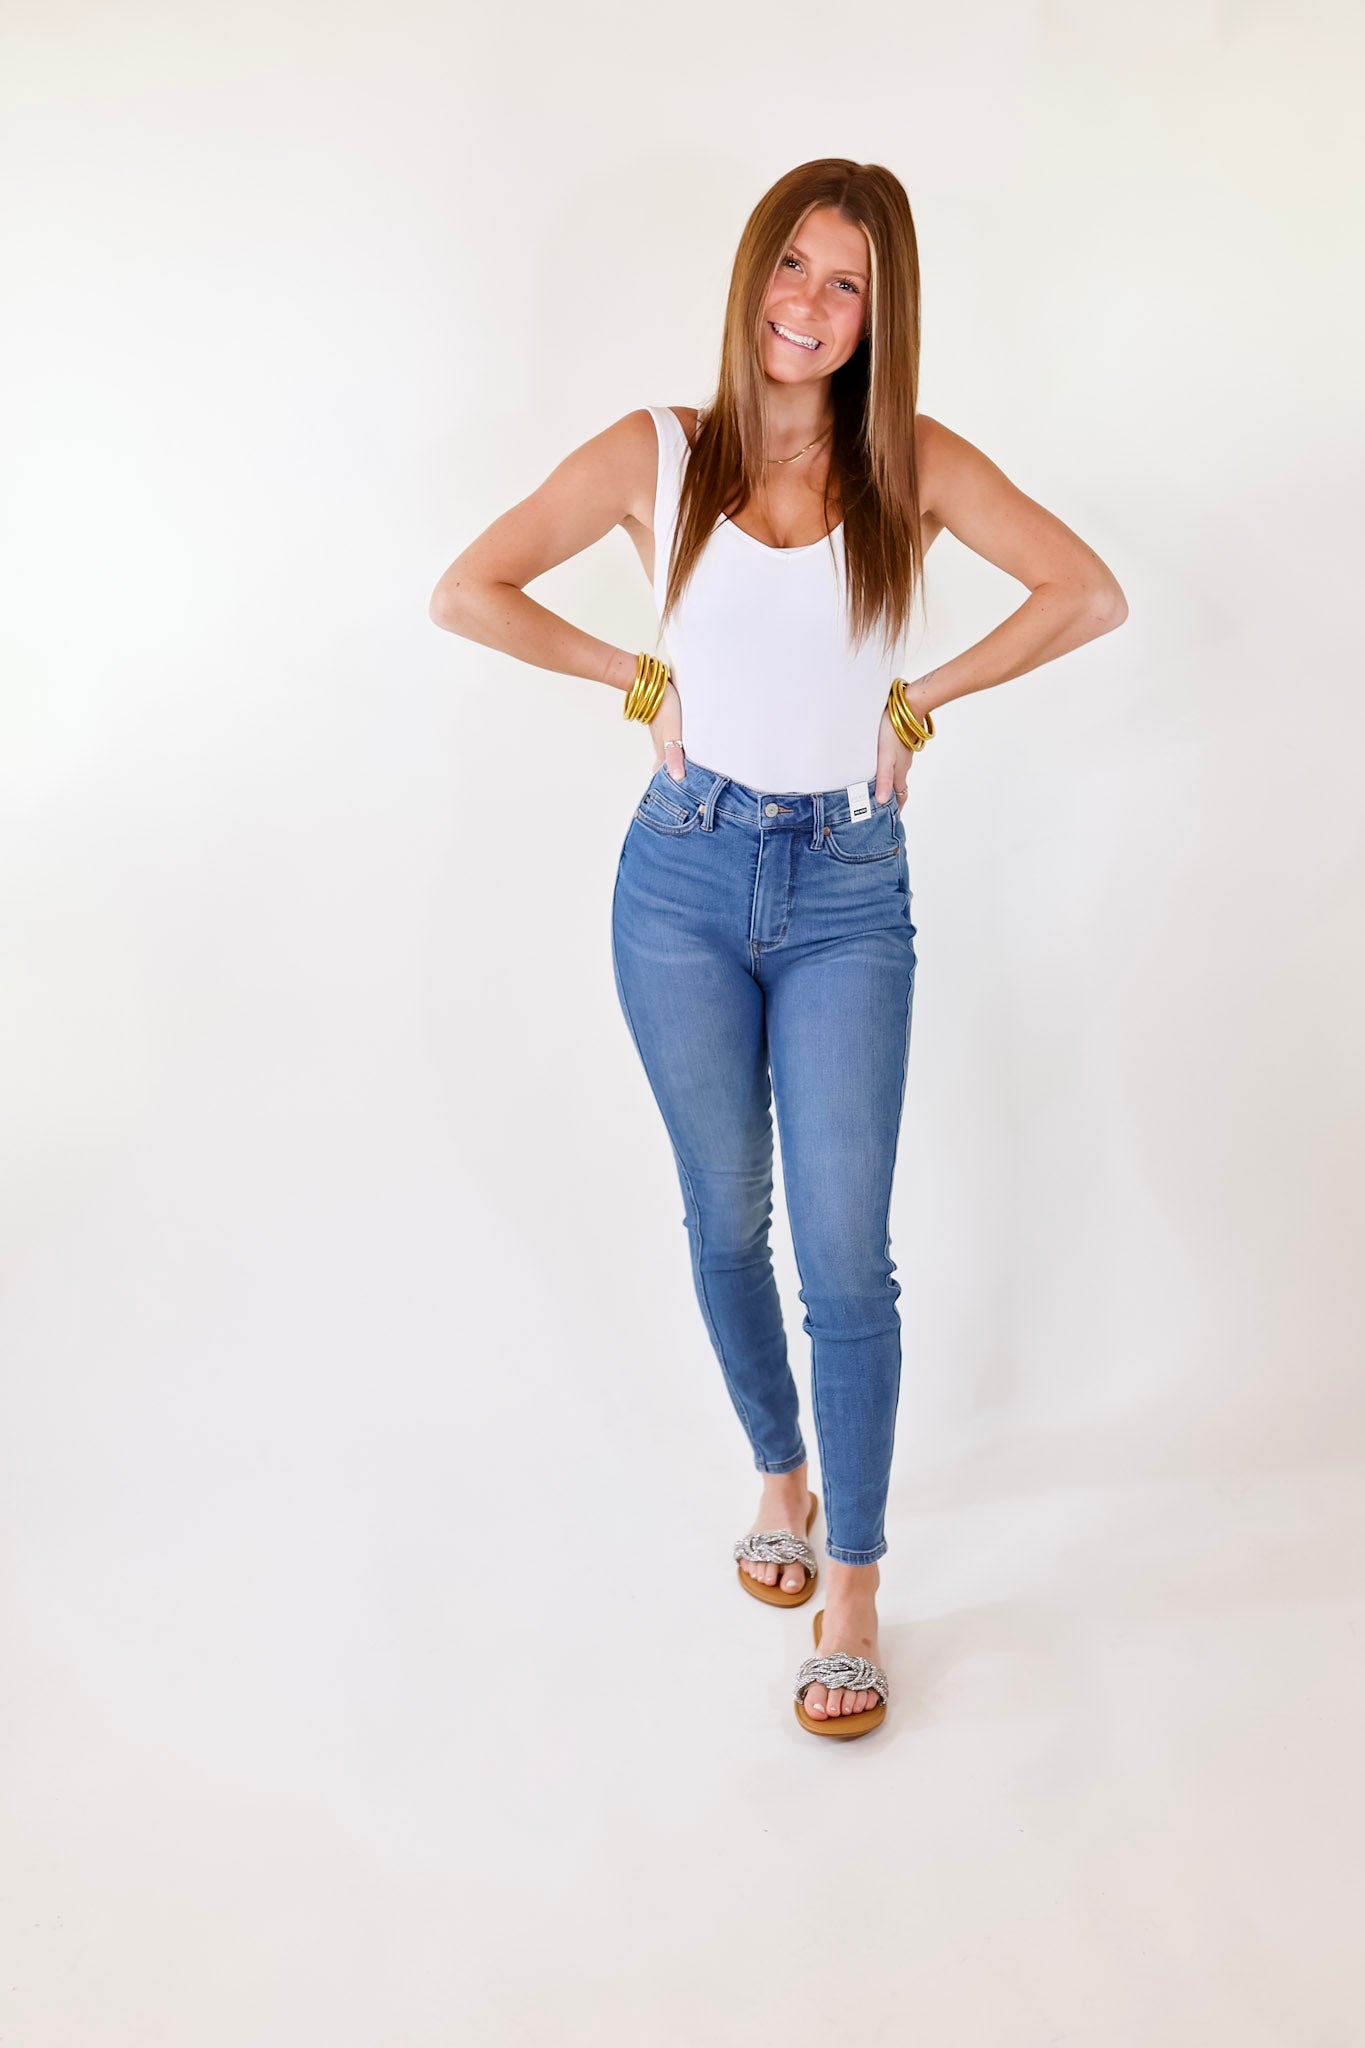 Judy Blue | Hopeful Dreamer Control Top Skinny Jeans in Medium Wash - Giddy Up Glamour Boutique